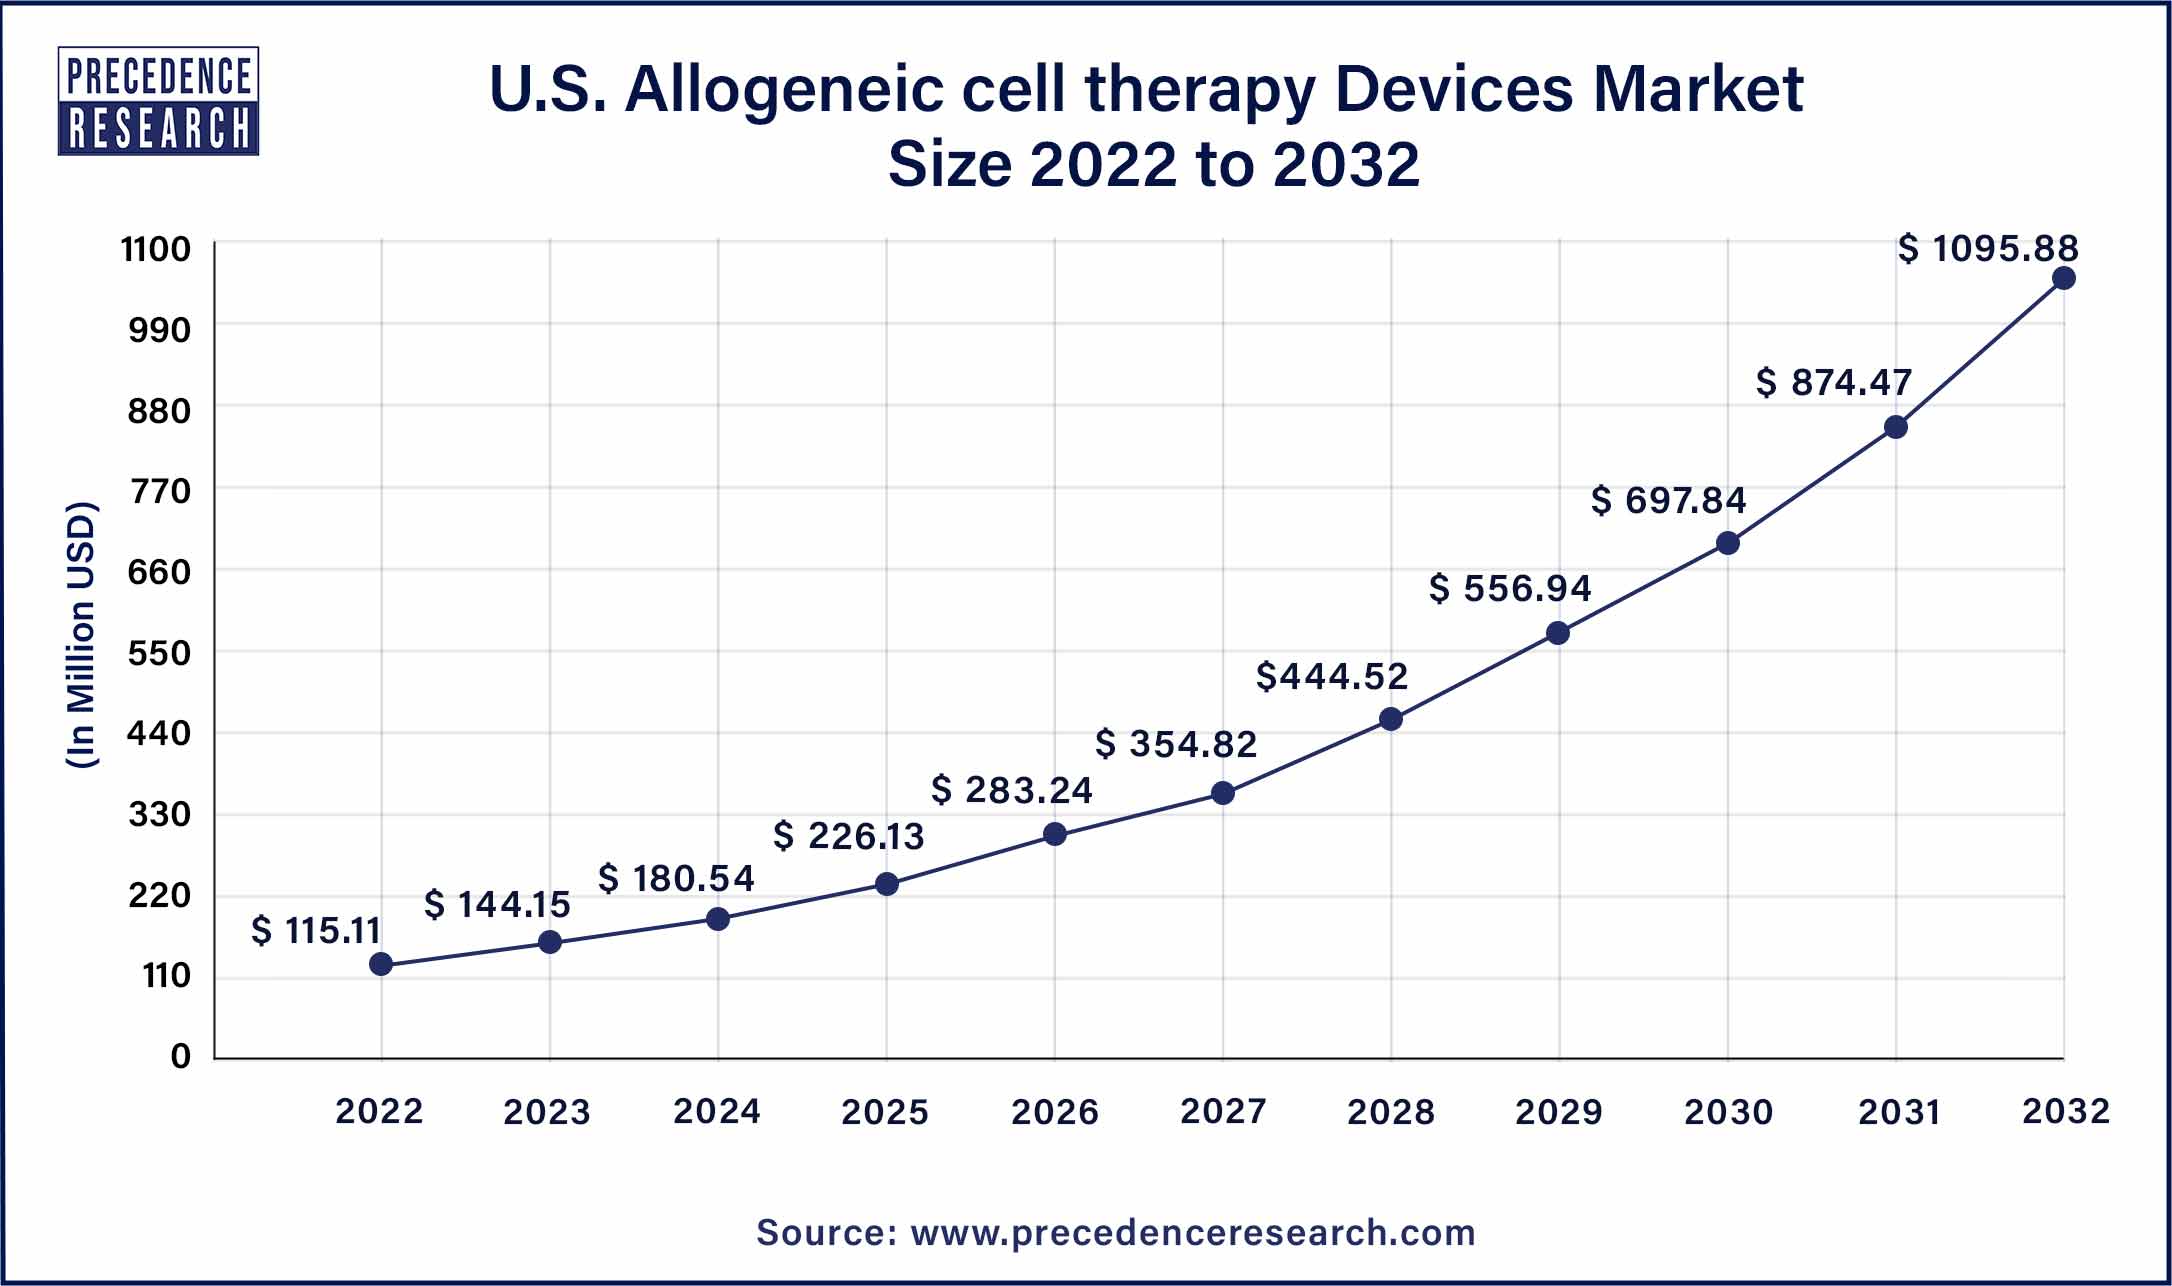 U.S. Allogeneic Cell Therapy Devices Market Size 2023 To 2032